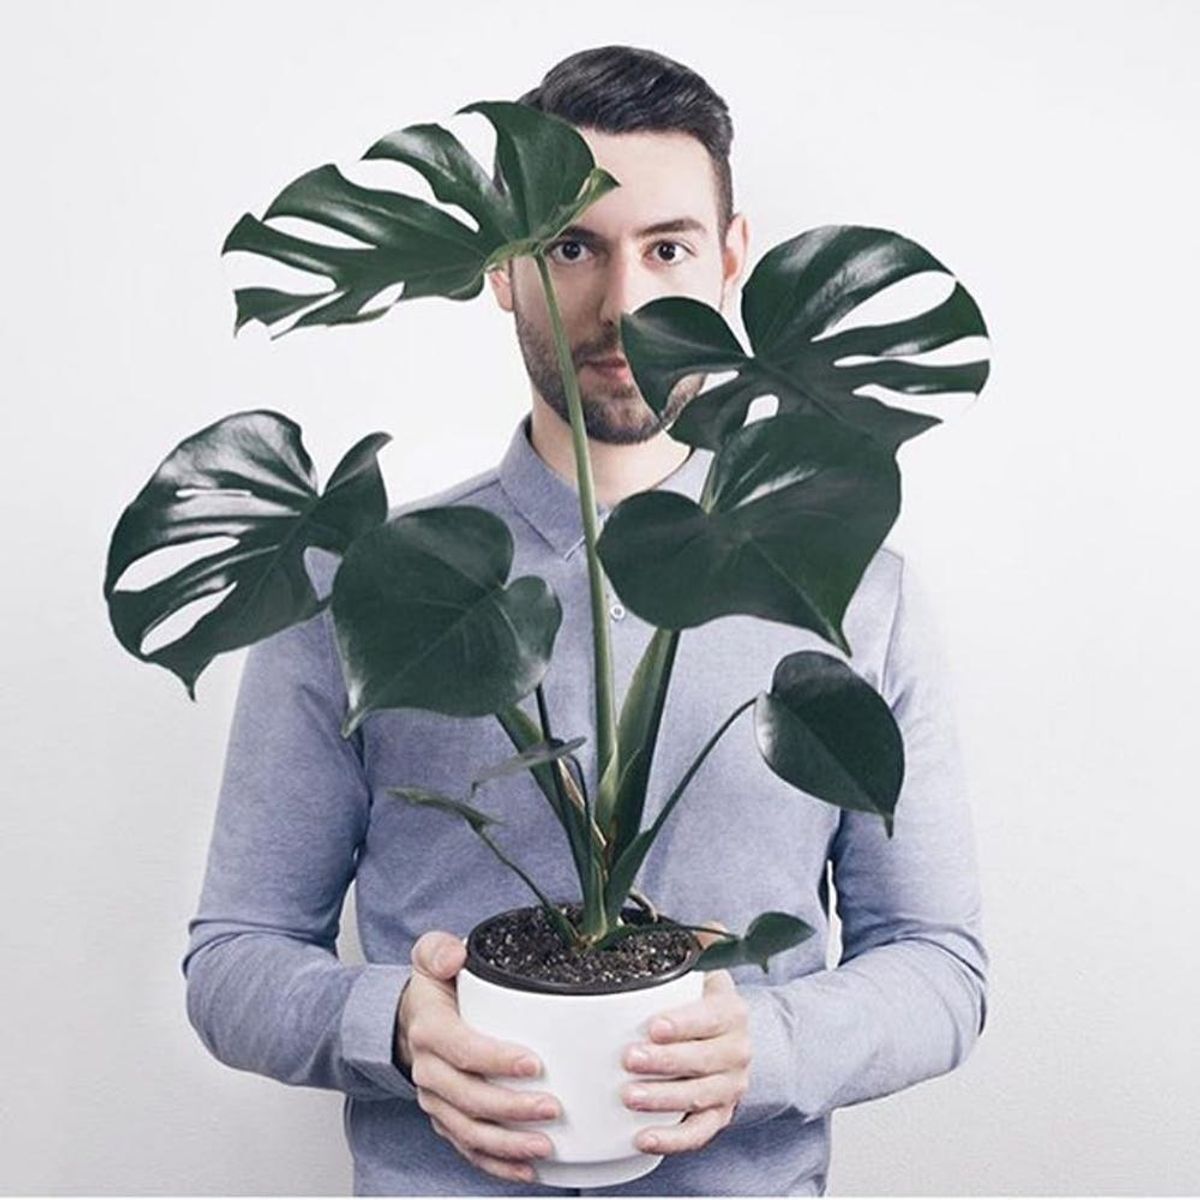 Boys With Plants Is Our New Favorite Instagram Account